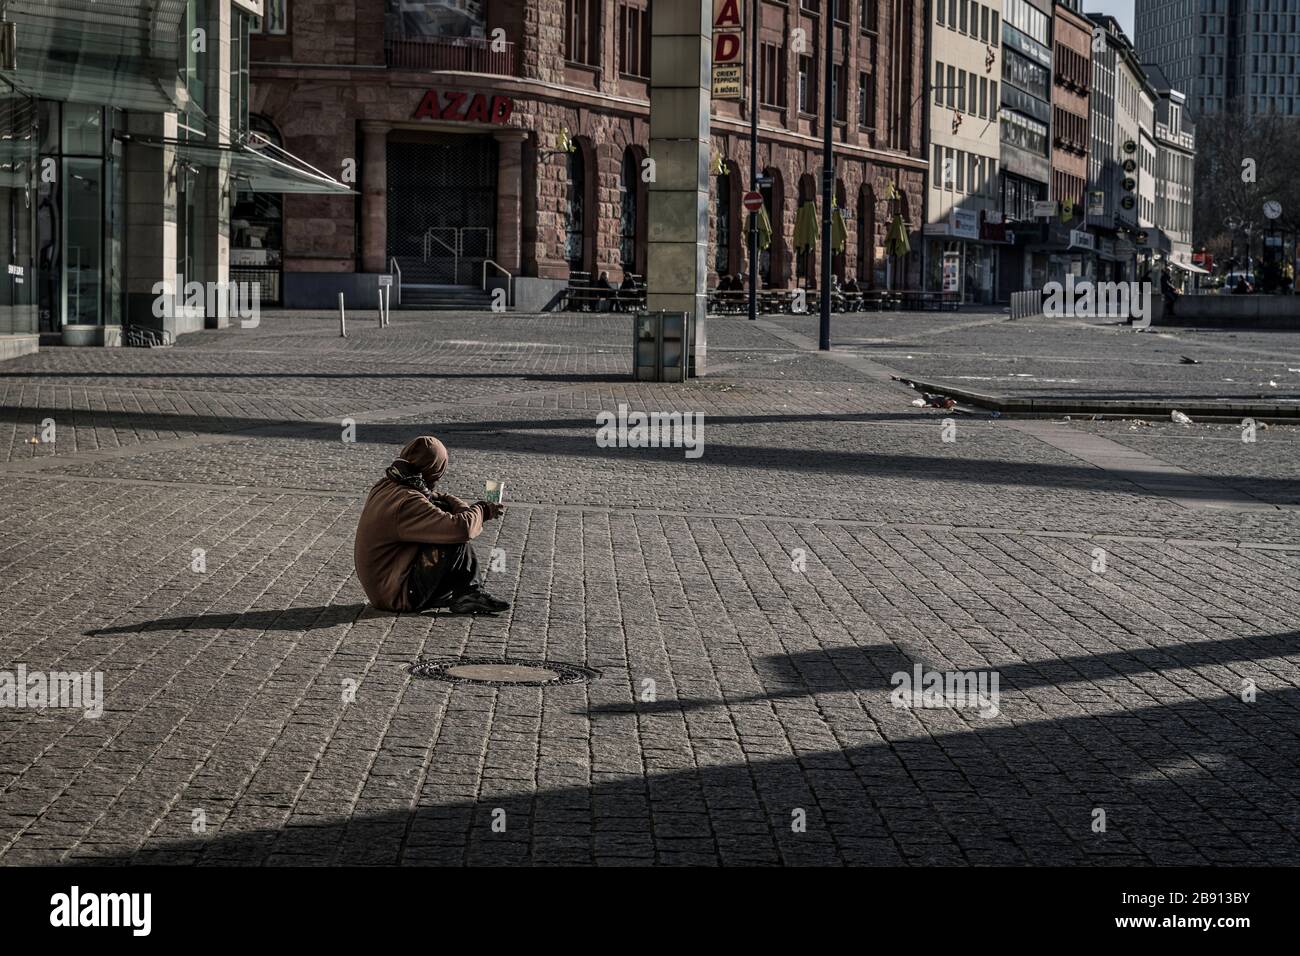 Beggars and homeless people in Dortmund in times of Corona crisis. Dortmund's city centre is almost deserted despite the weekly market. Only a few still do their shopping, some with face masks, like here on Hansaplatz. Stock Photo